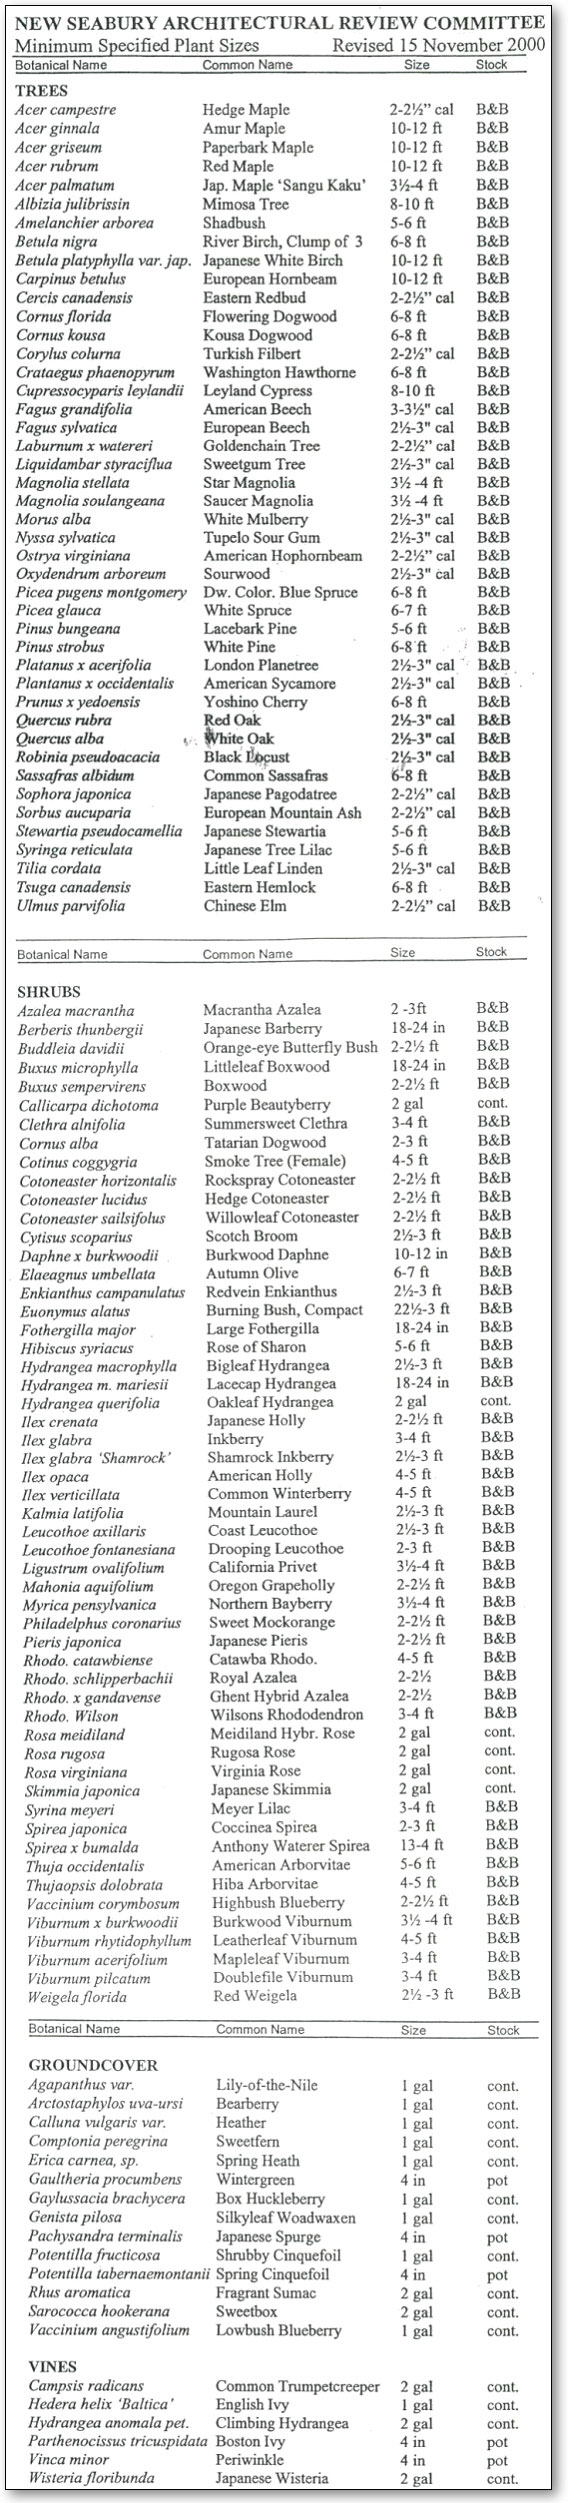 List of minimum dpecified plant sizes